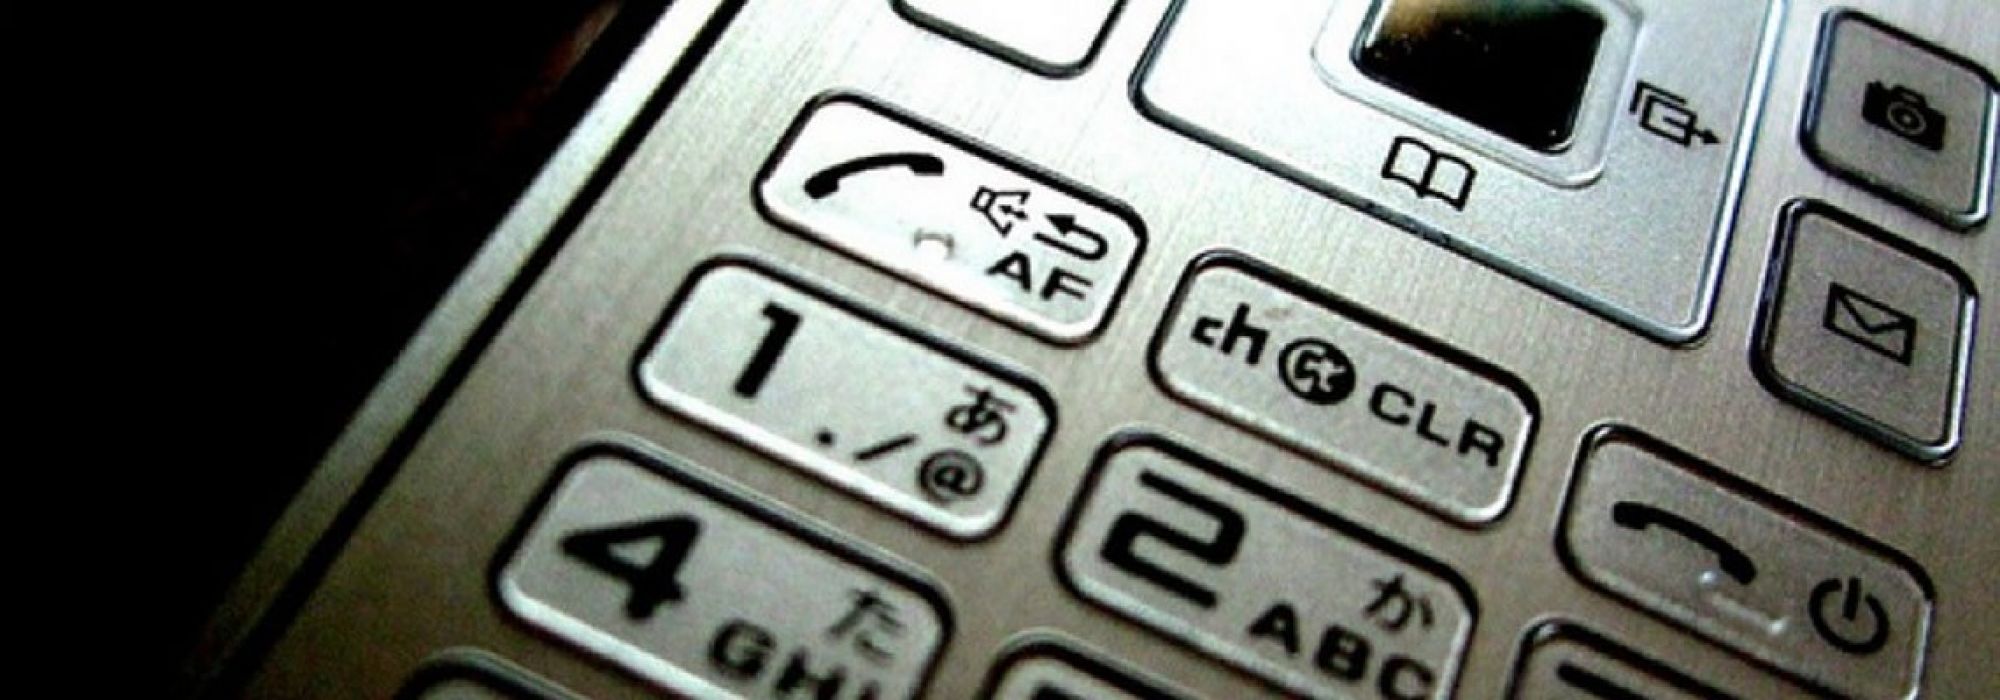 Close up photo of the number pad on an older mobile phone.